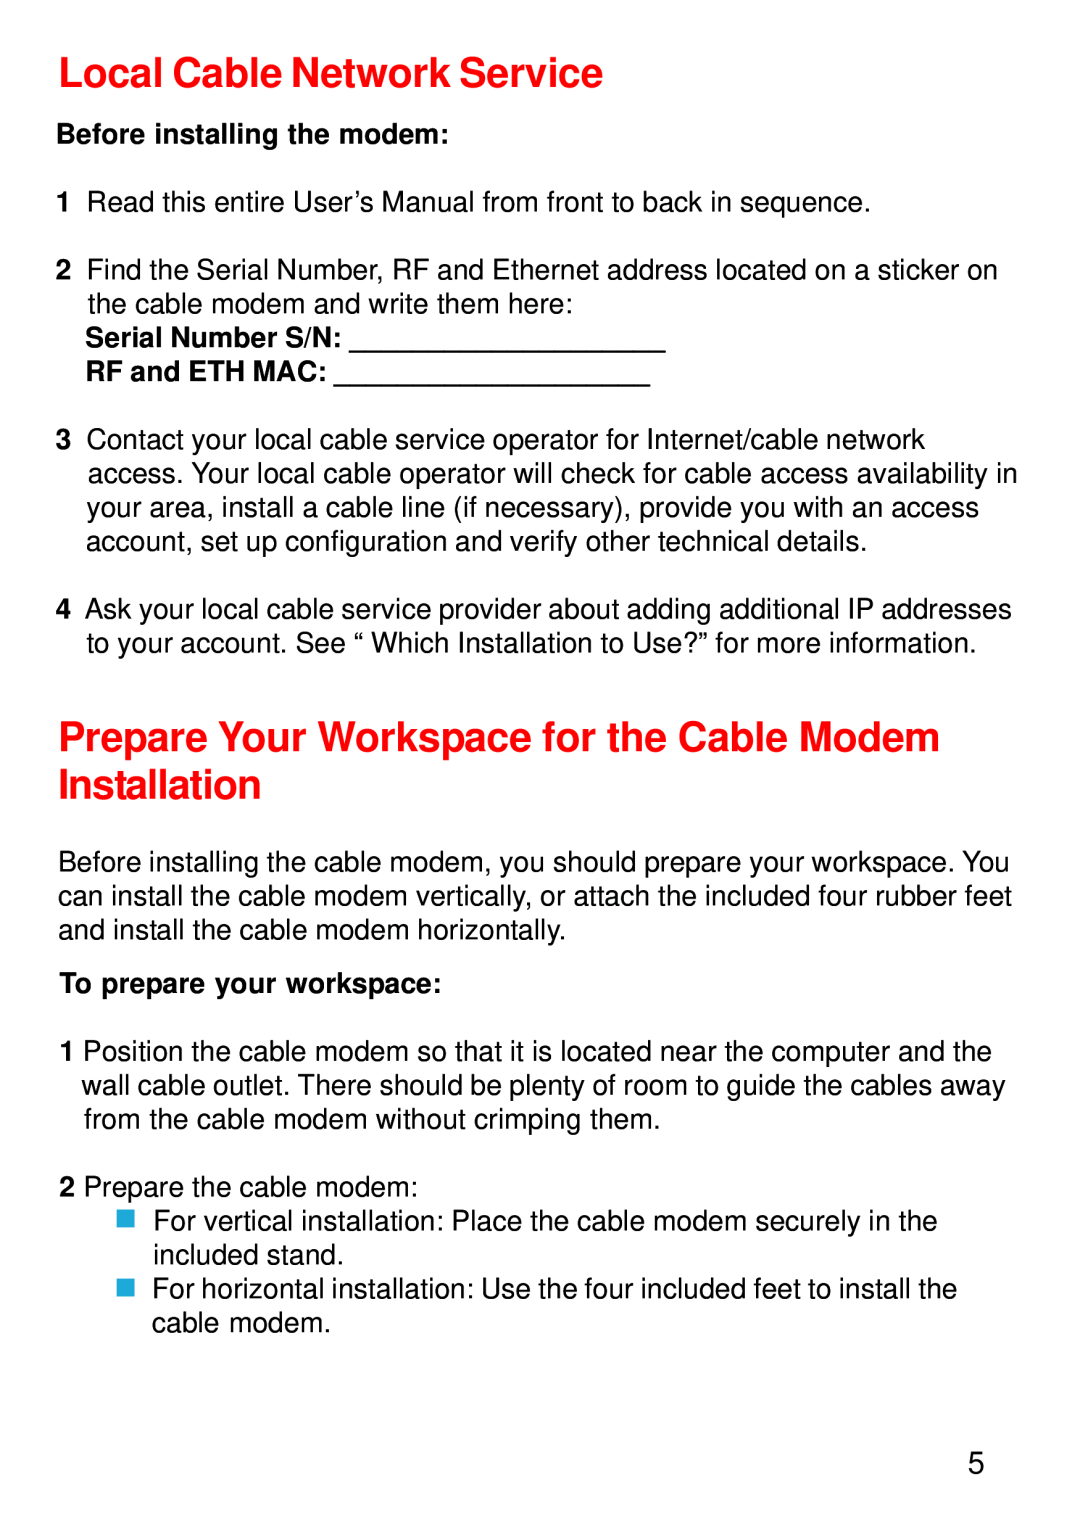 D-Link DCM-202 manual Local Cable Network Service, Prepare Your Workspace for the Cable Modem Installation 